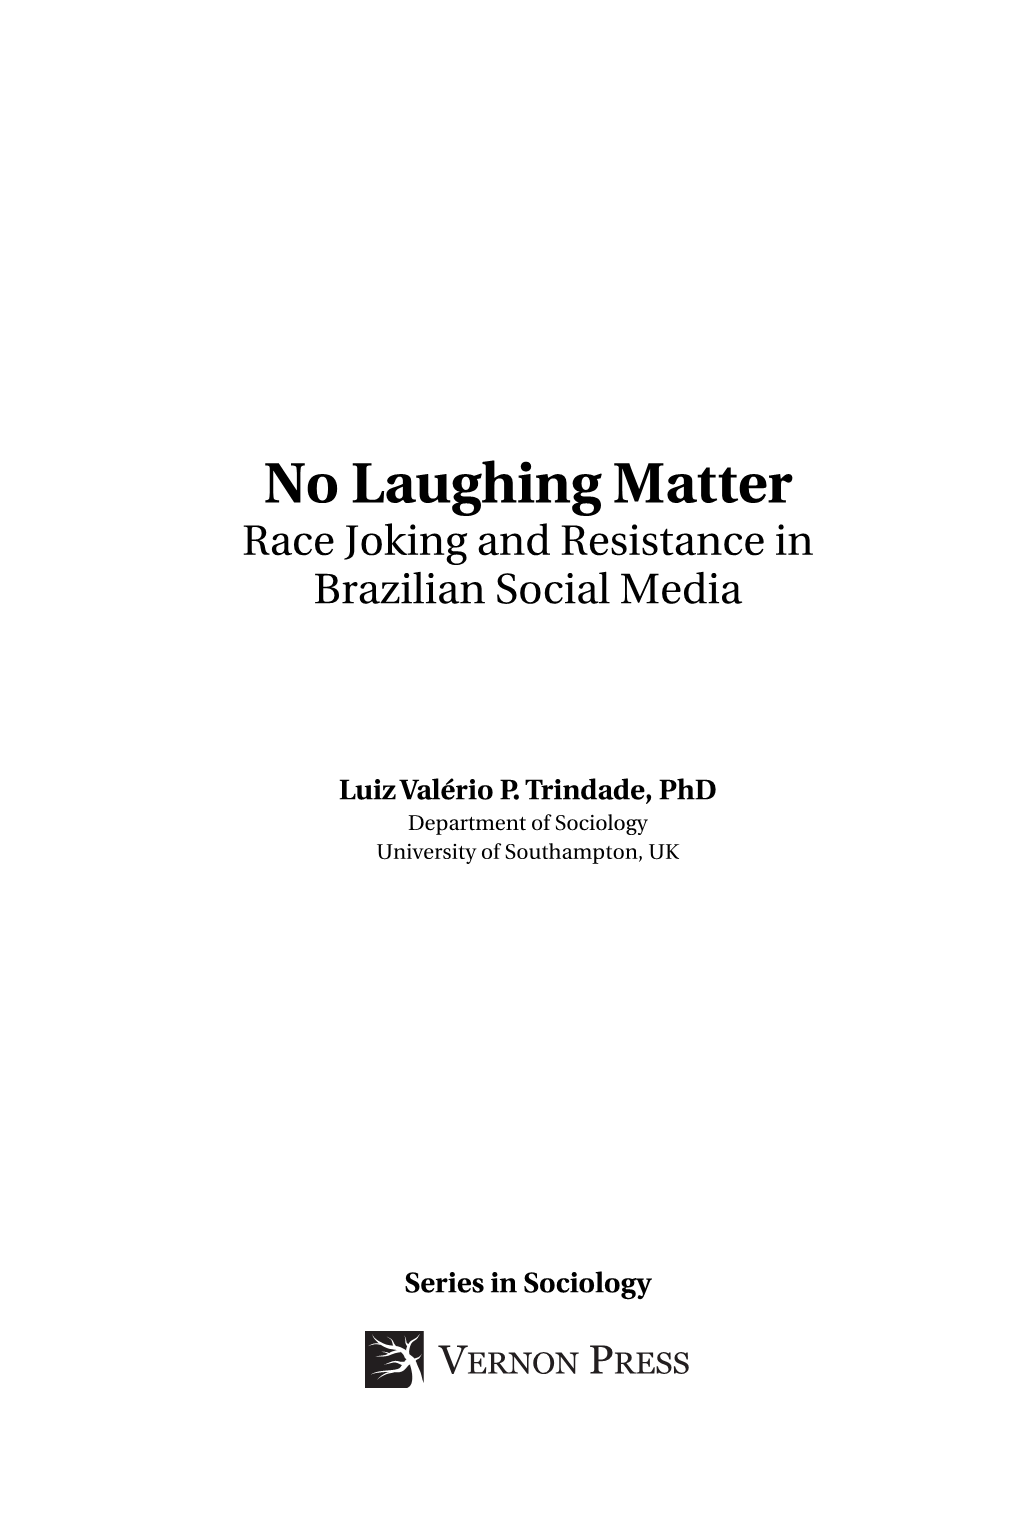 No Laughing Matter Race Joking and Resistance in Brazilian Social Media